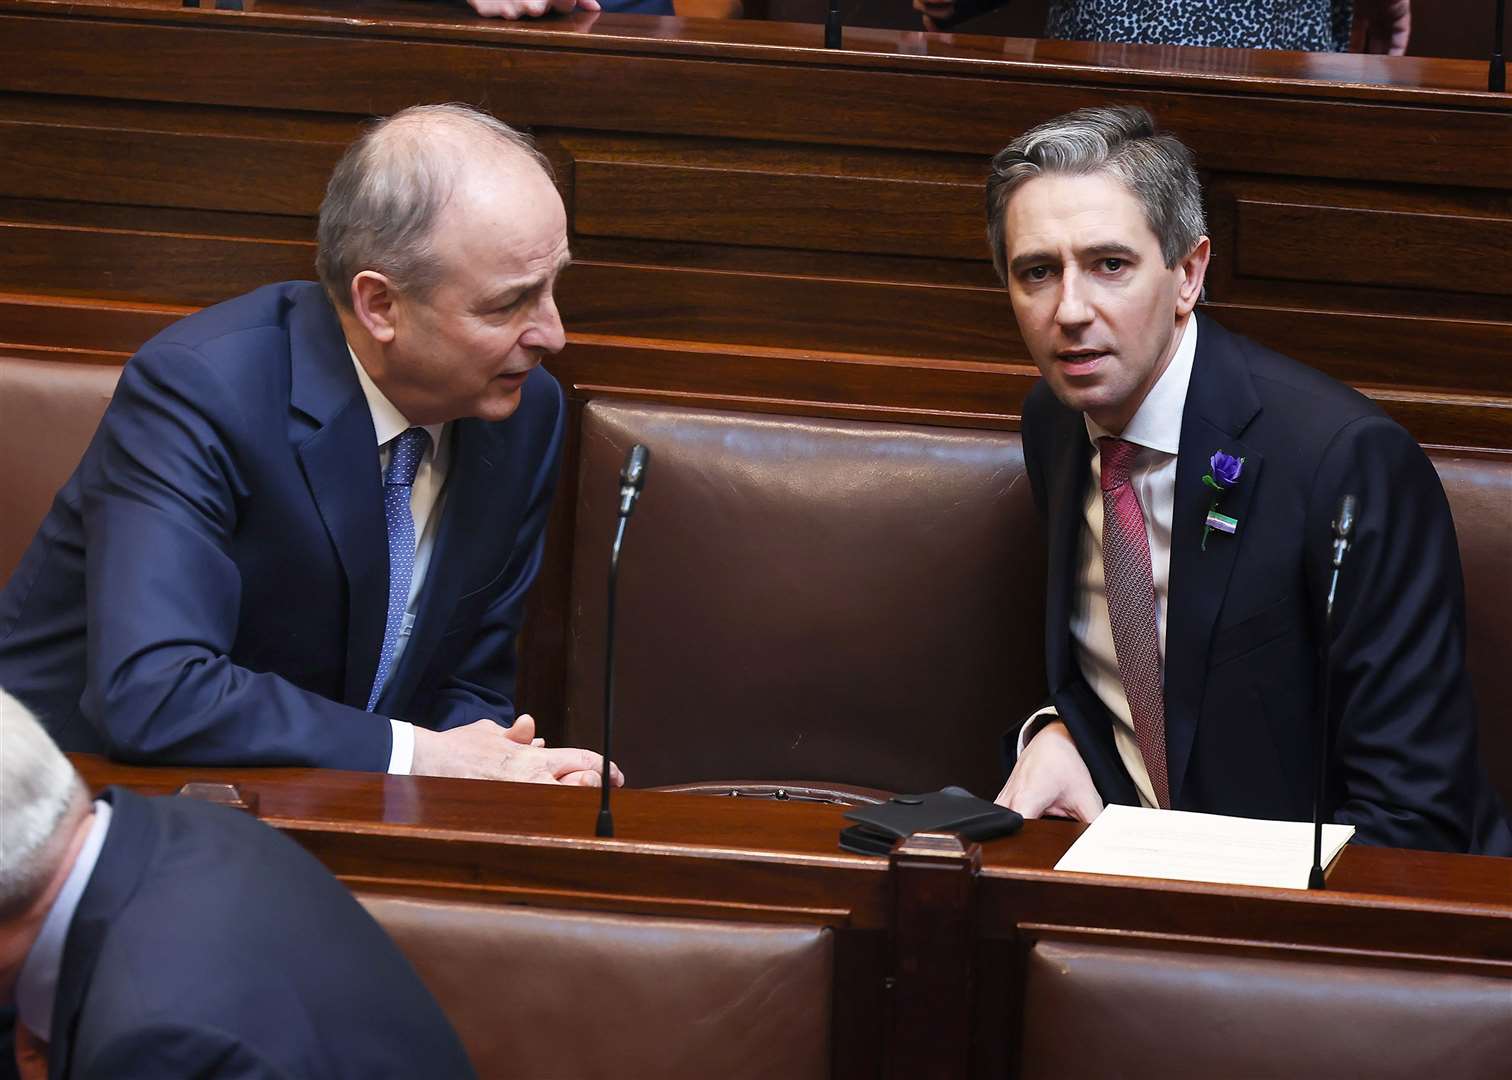 Micheal Martin spoke in support of Mr Harris’s nomination (Maxwell Photography/PA)